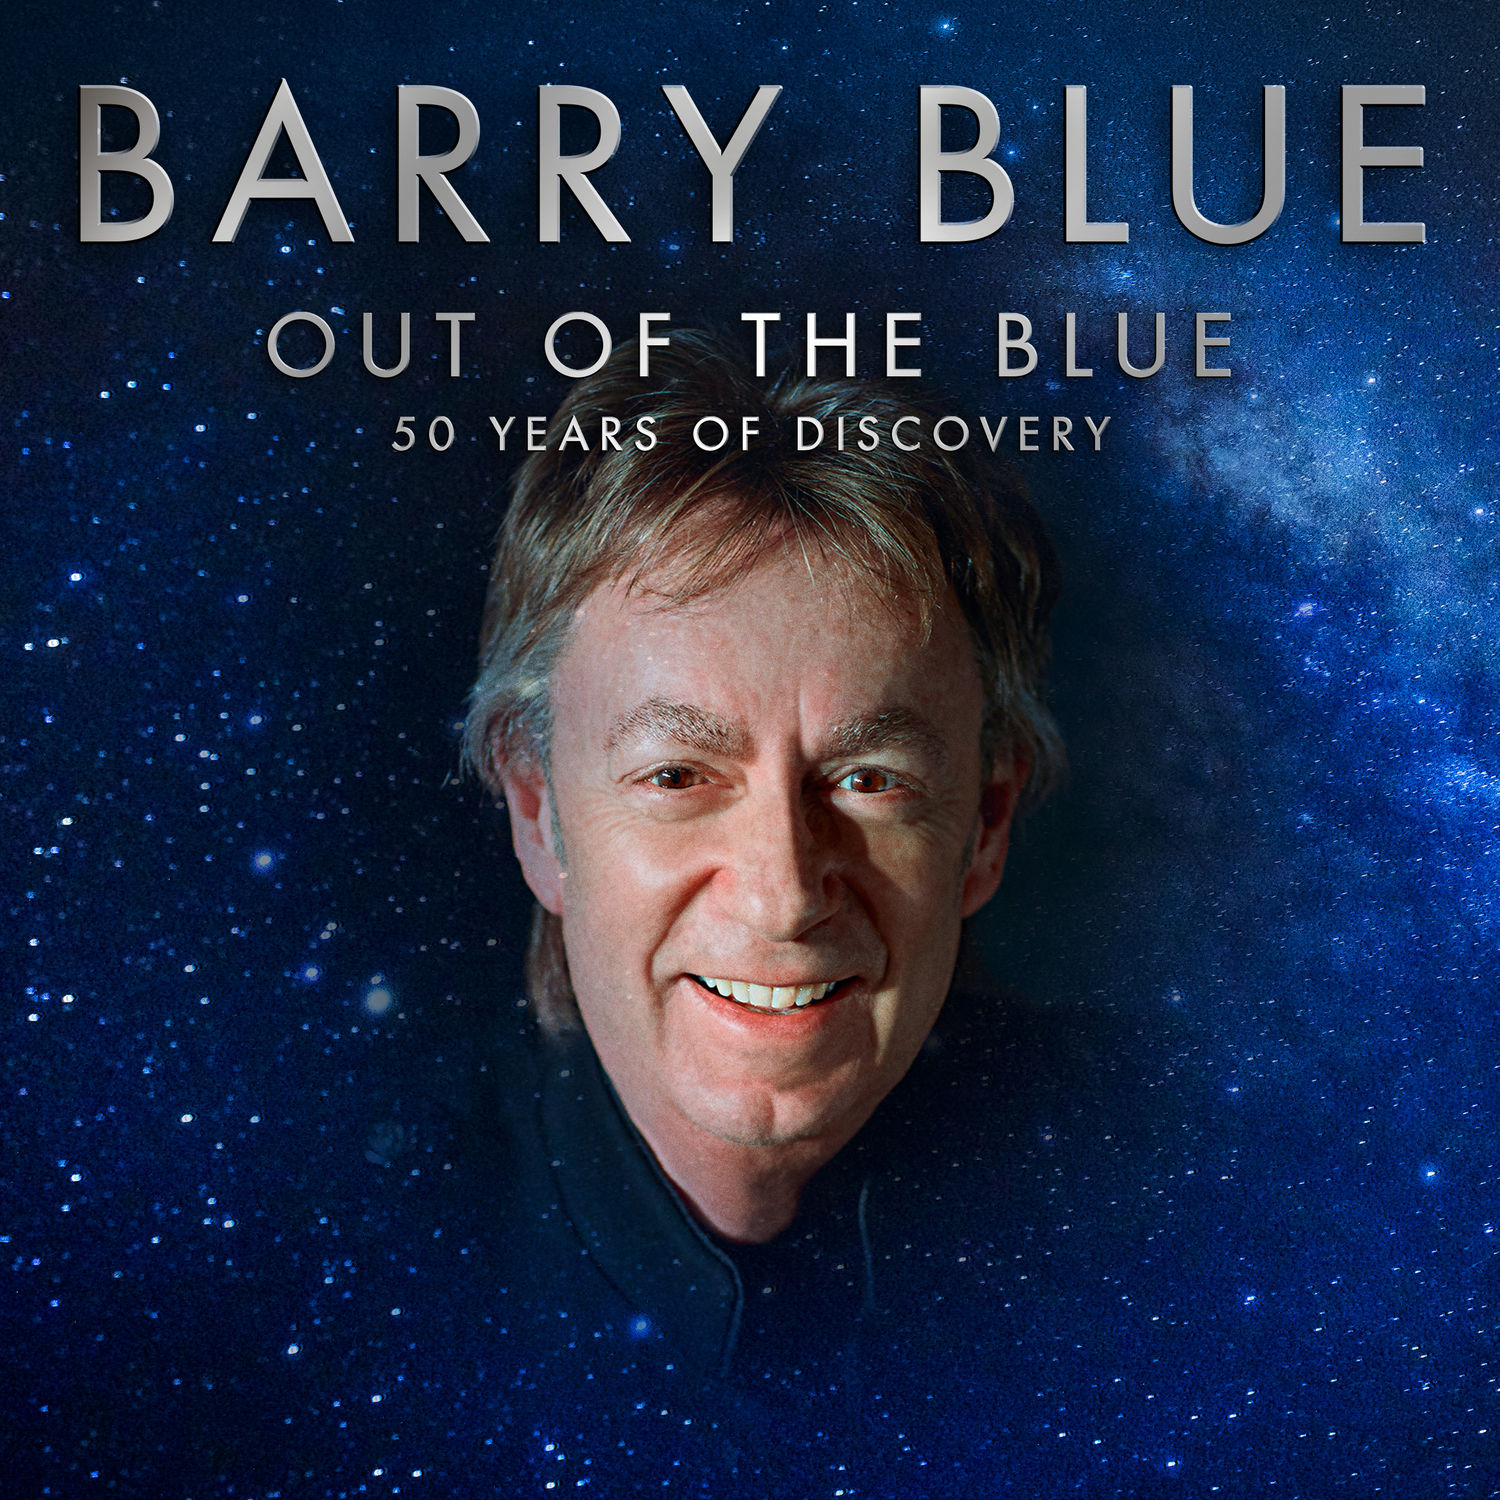 Barry Blue – Out of the Blue (50 Years of Discovery) (2021) [FLAC 24bit/44,1kHz]